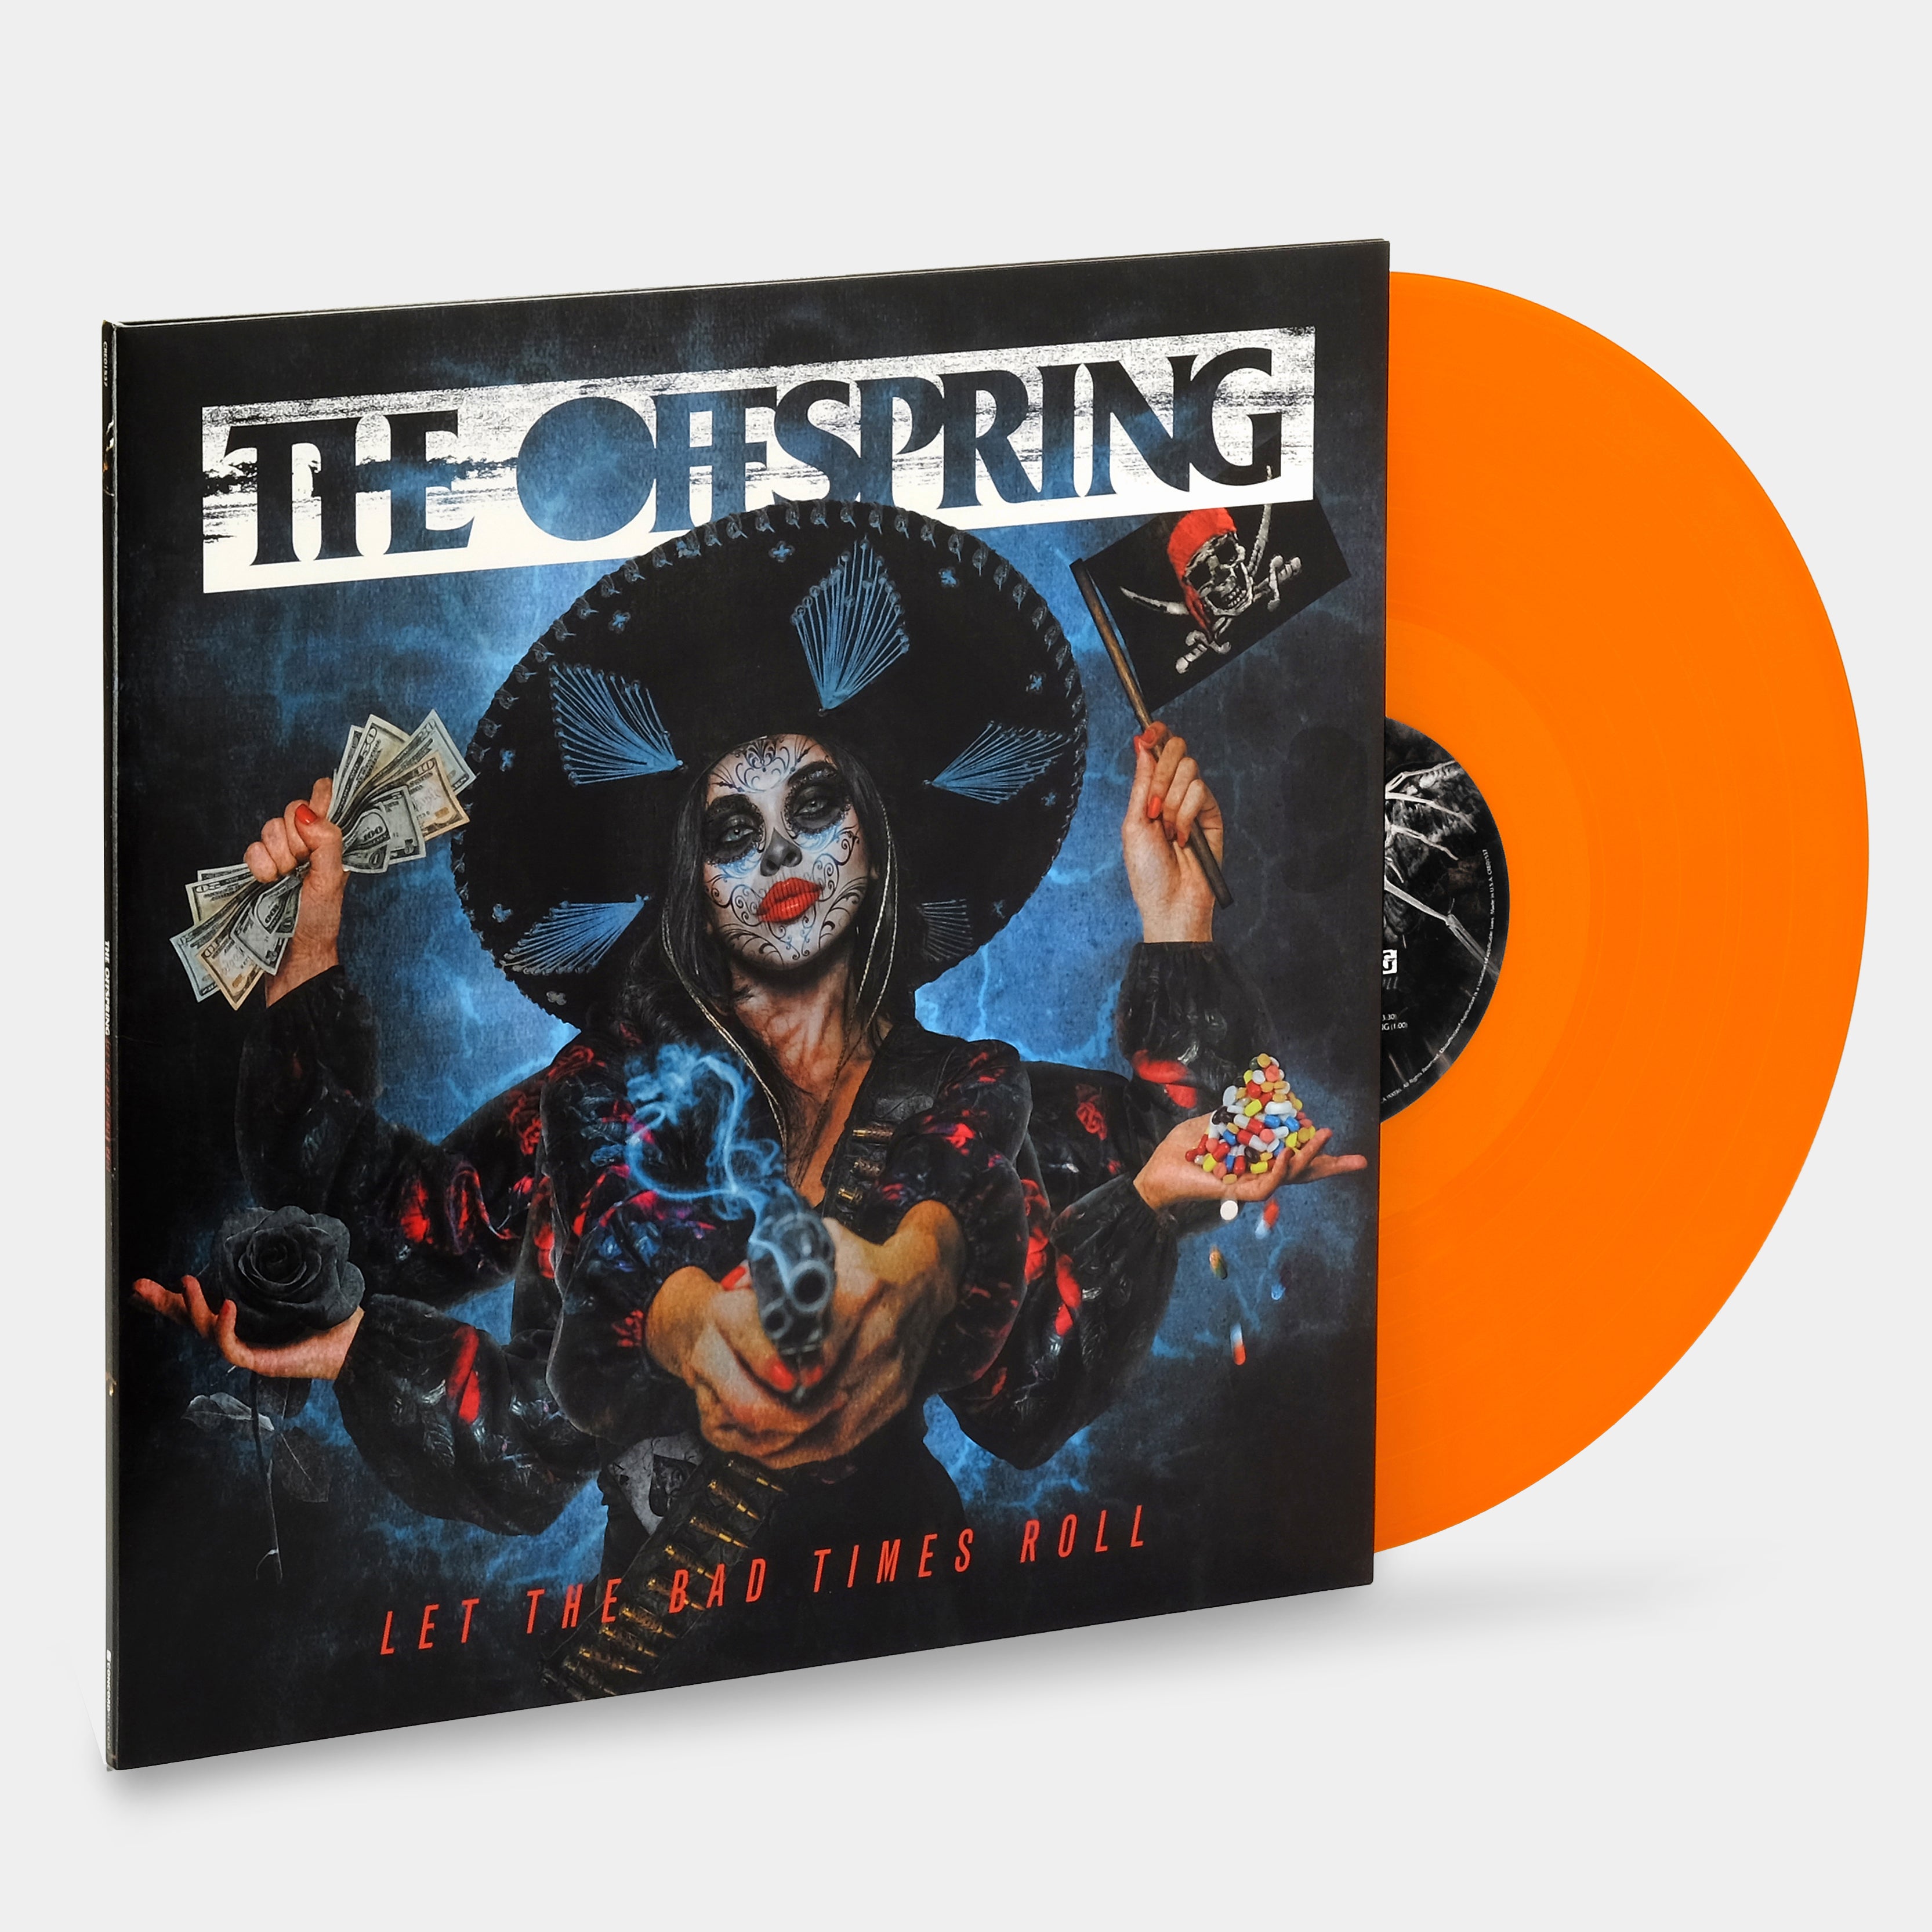 The Offspring - Let the Bad Times Roll LP Orange Crush Vinyl Record